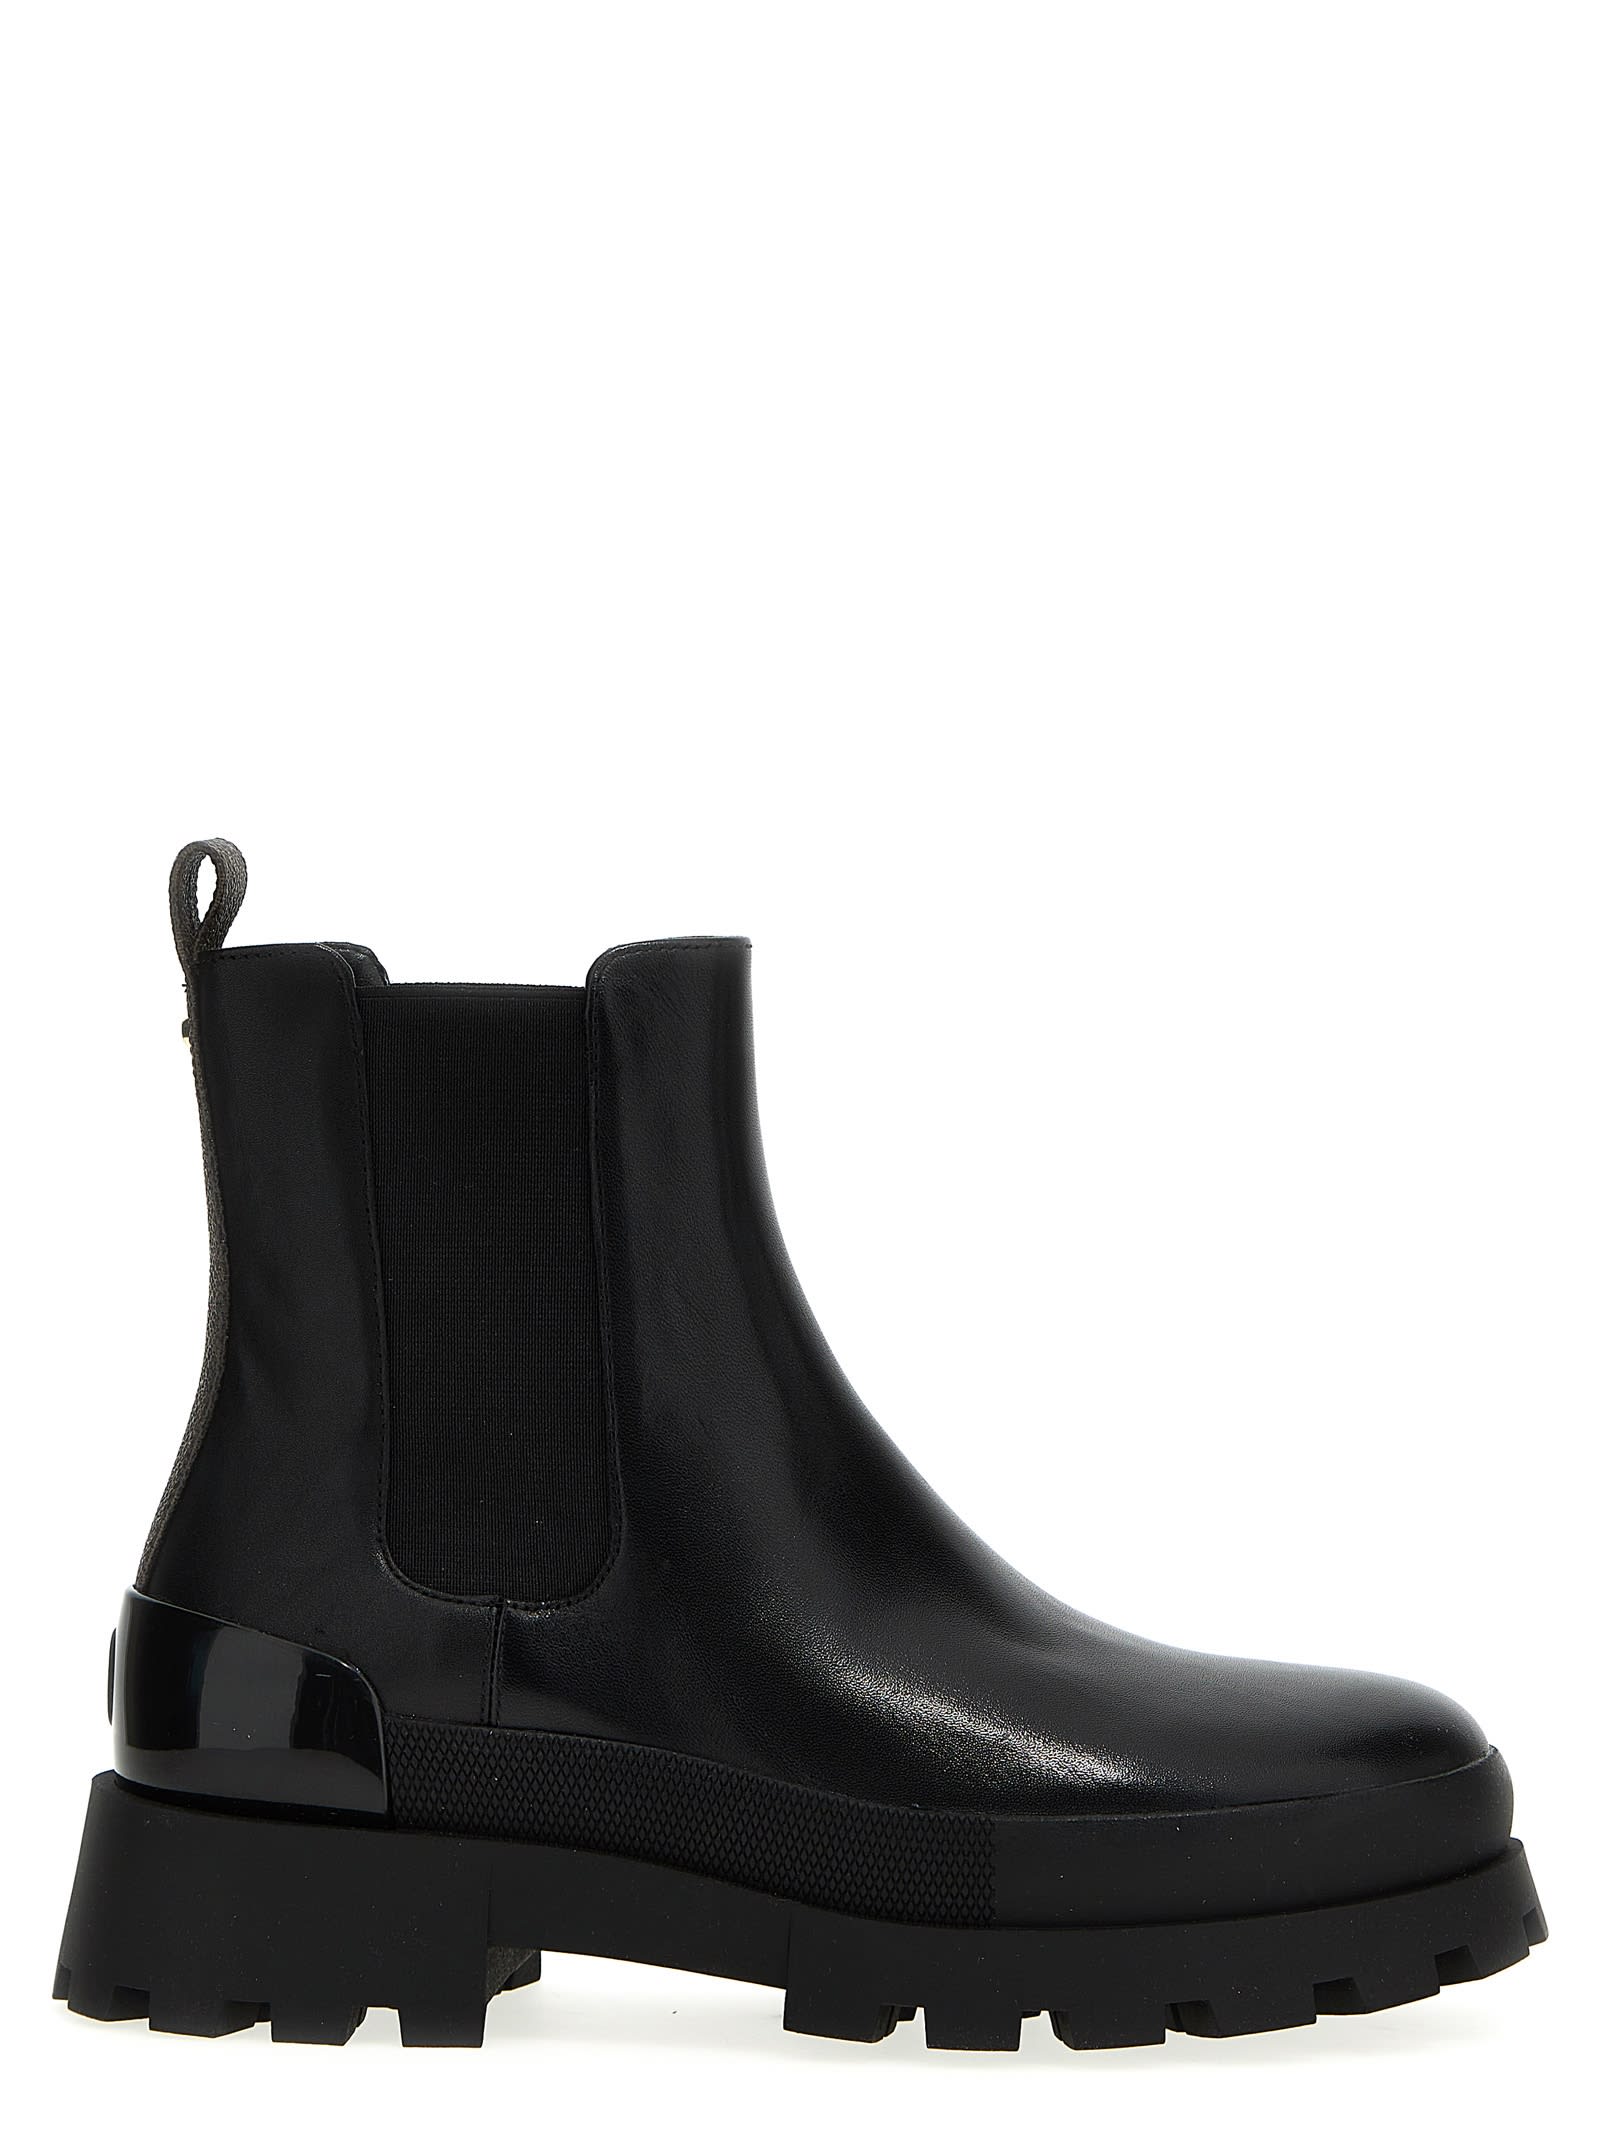 MICHAEL KORS CLARA LEATHER ANKLE BOOTS